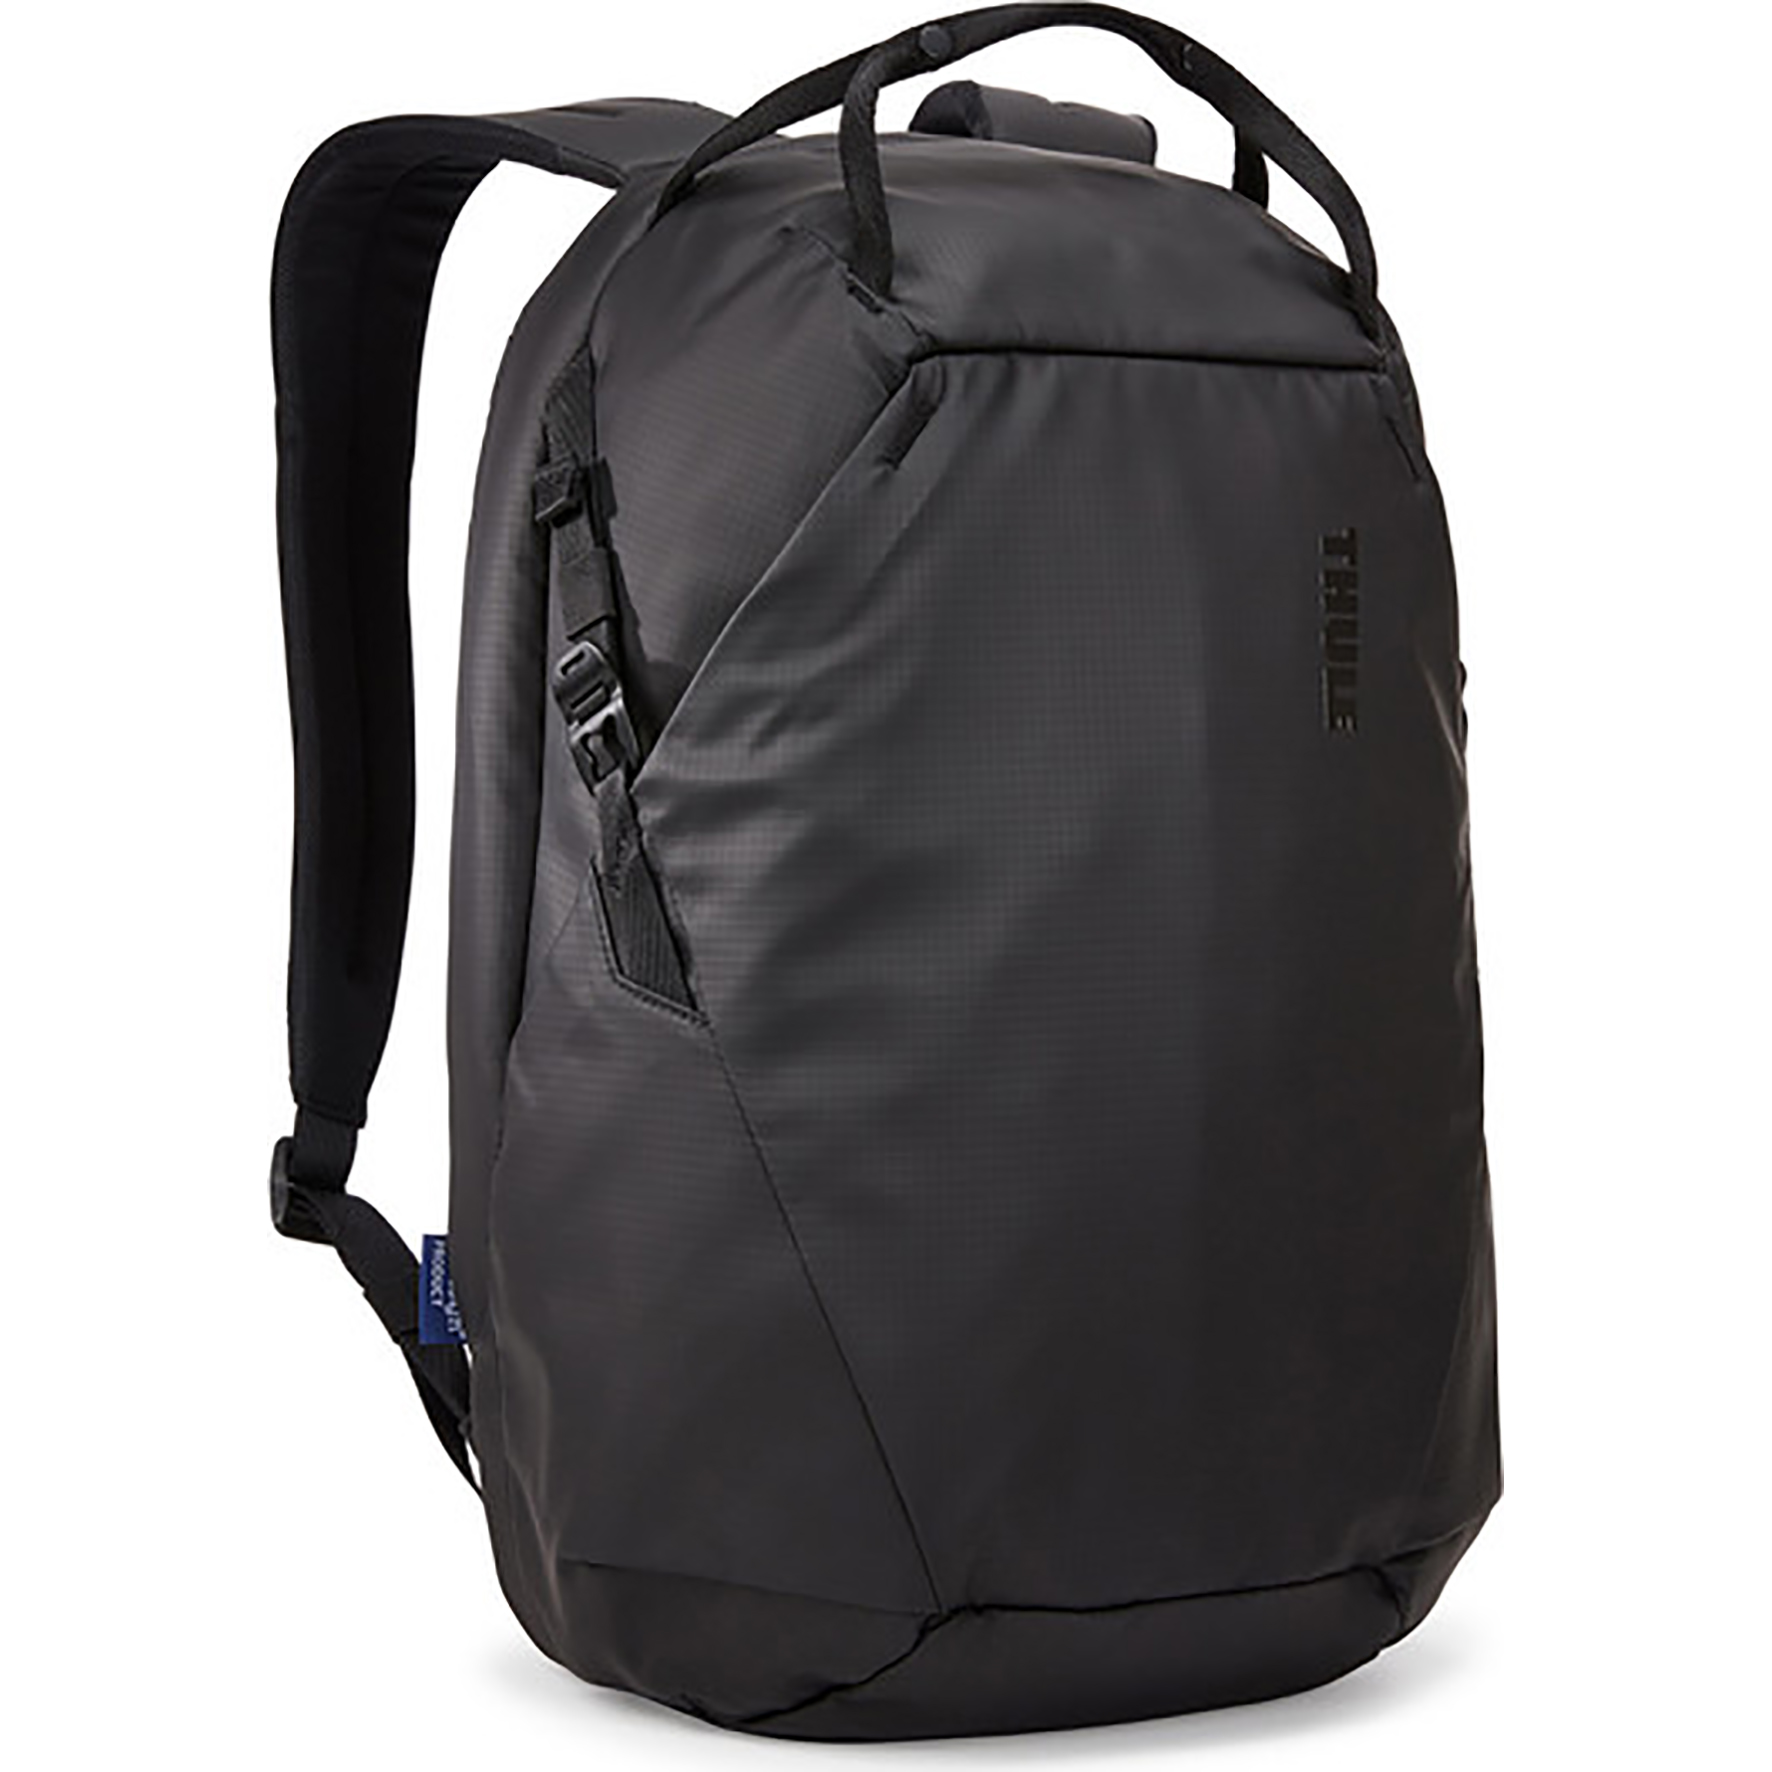 [8559519] Tact Backpack 16L